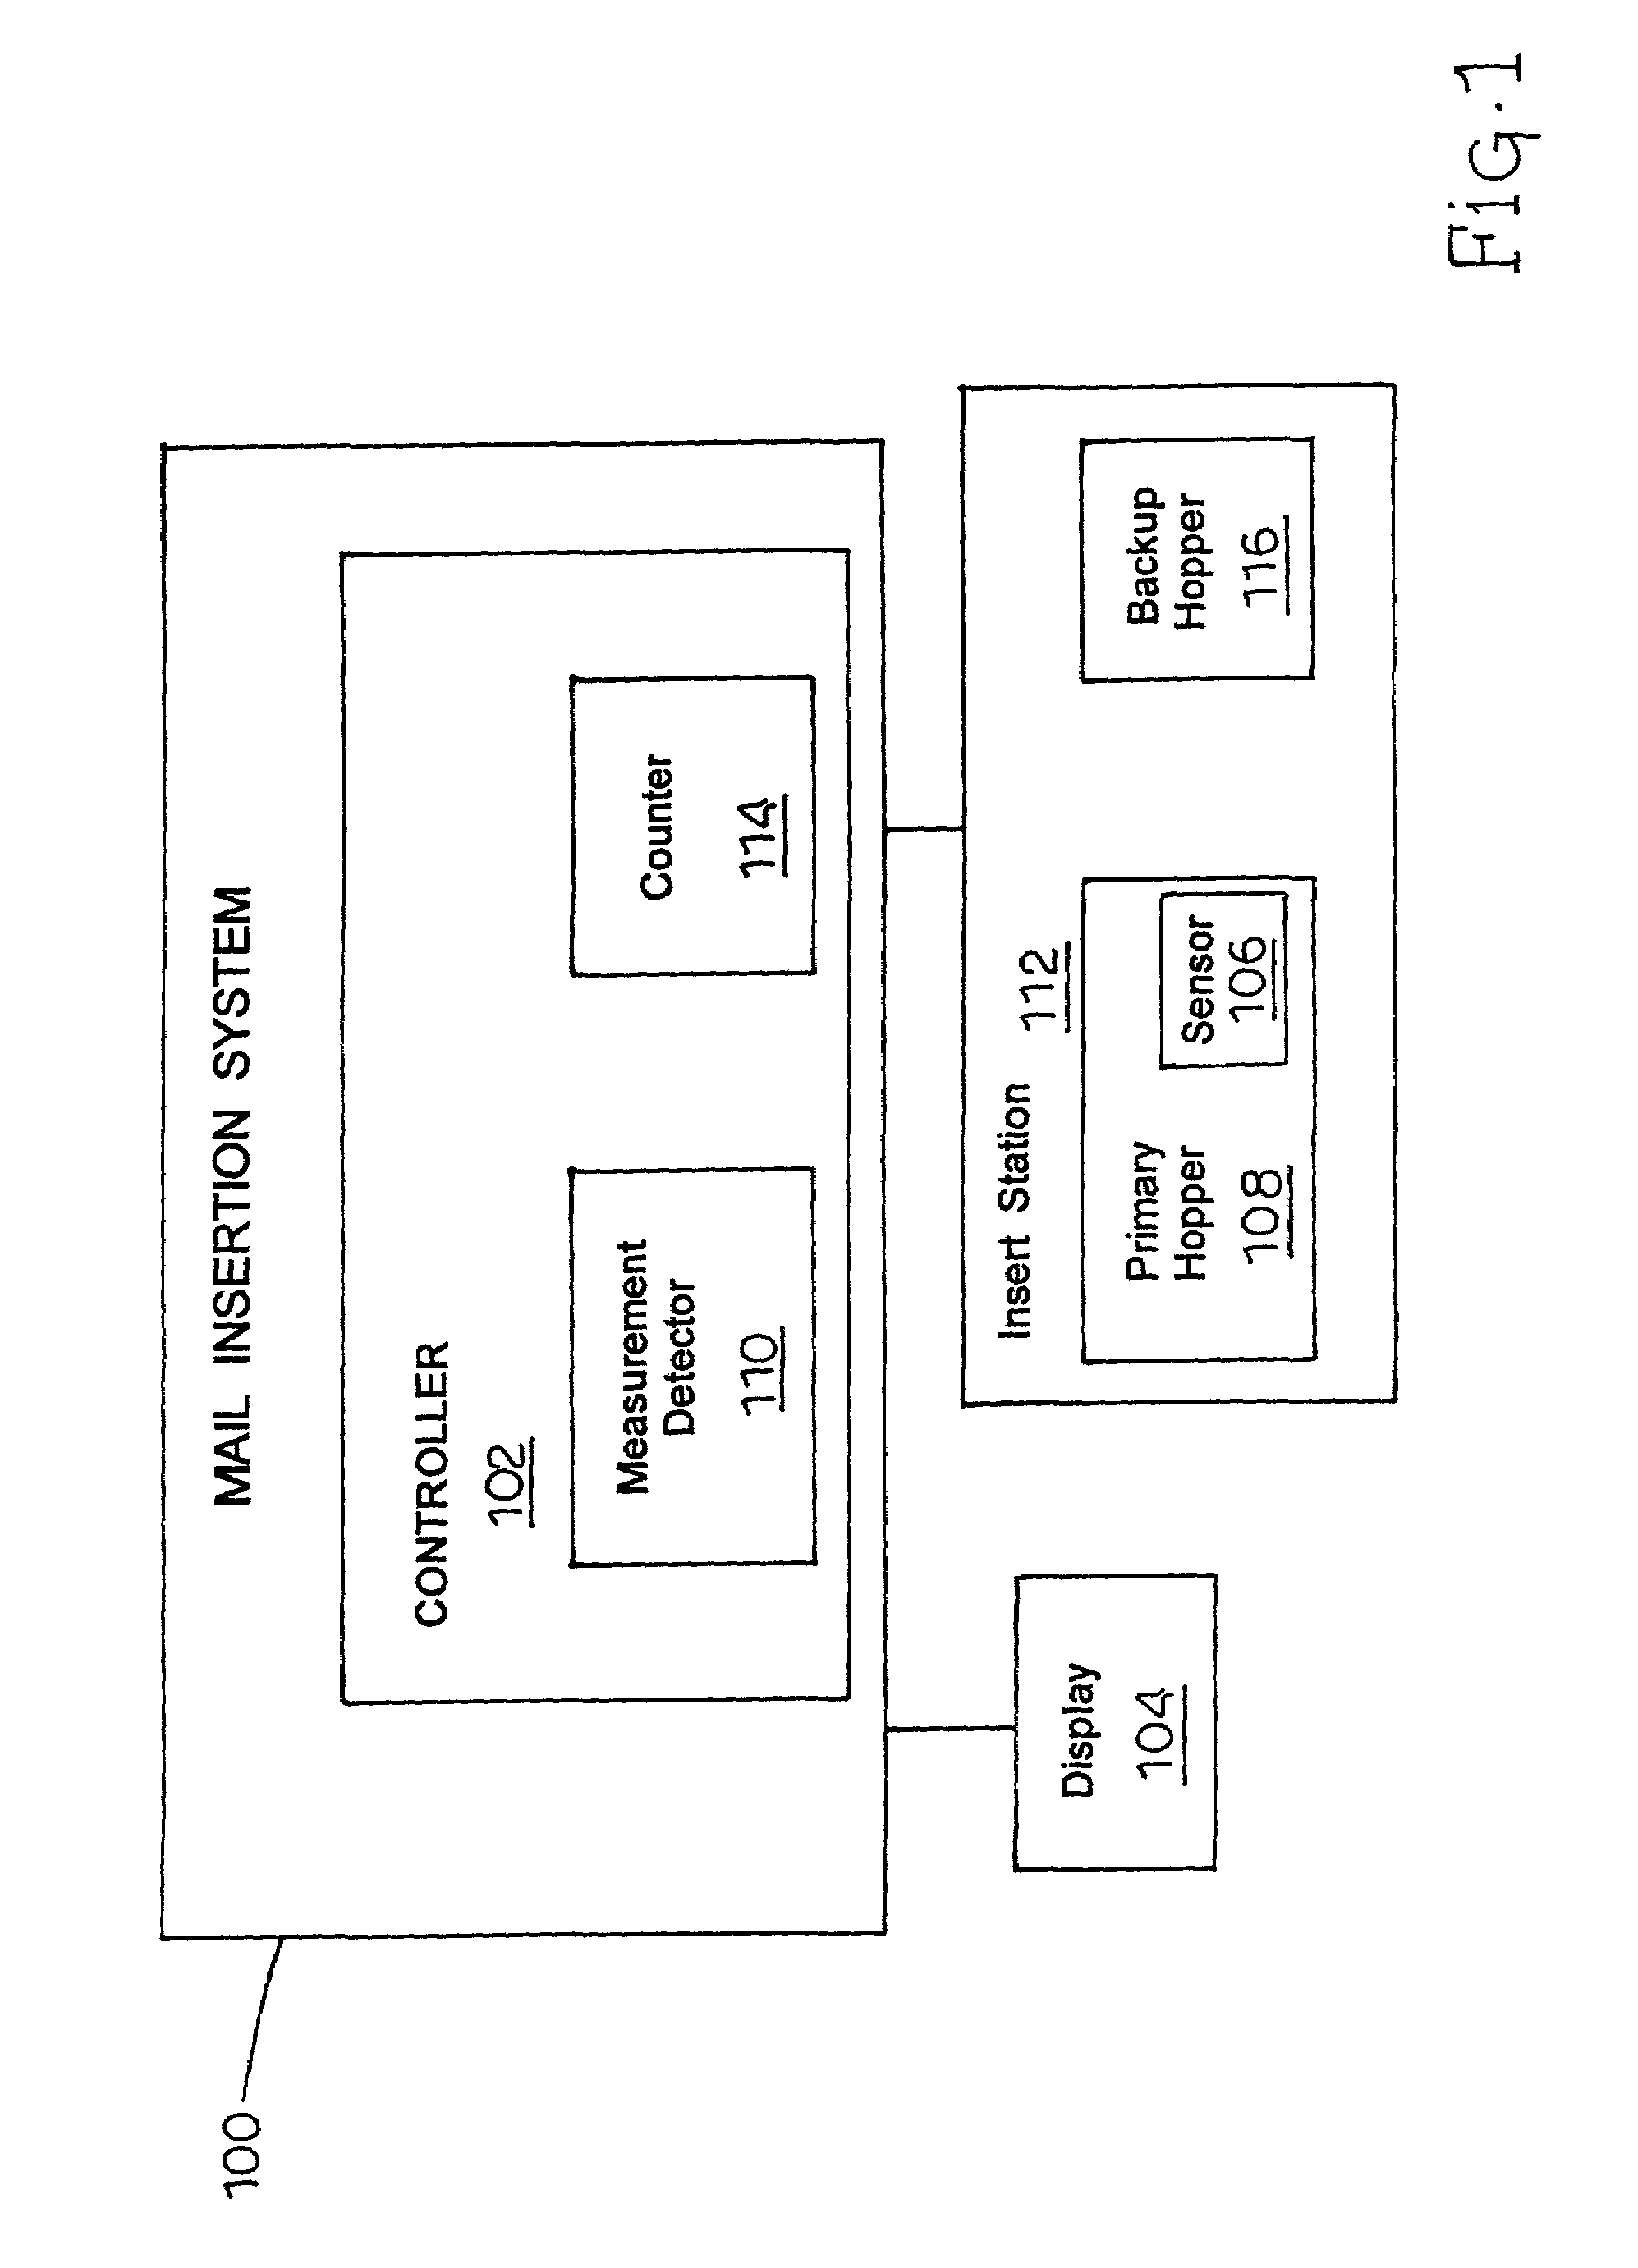 System and method for monitoring grouped resources